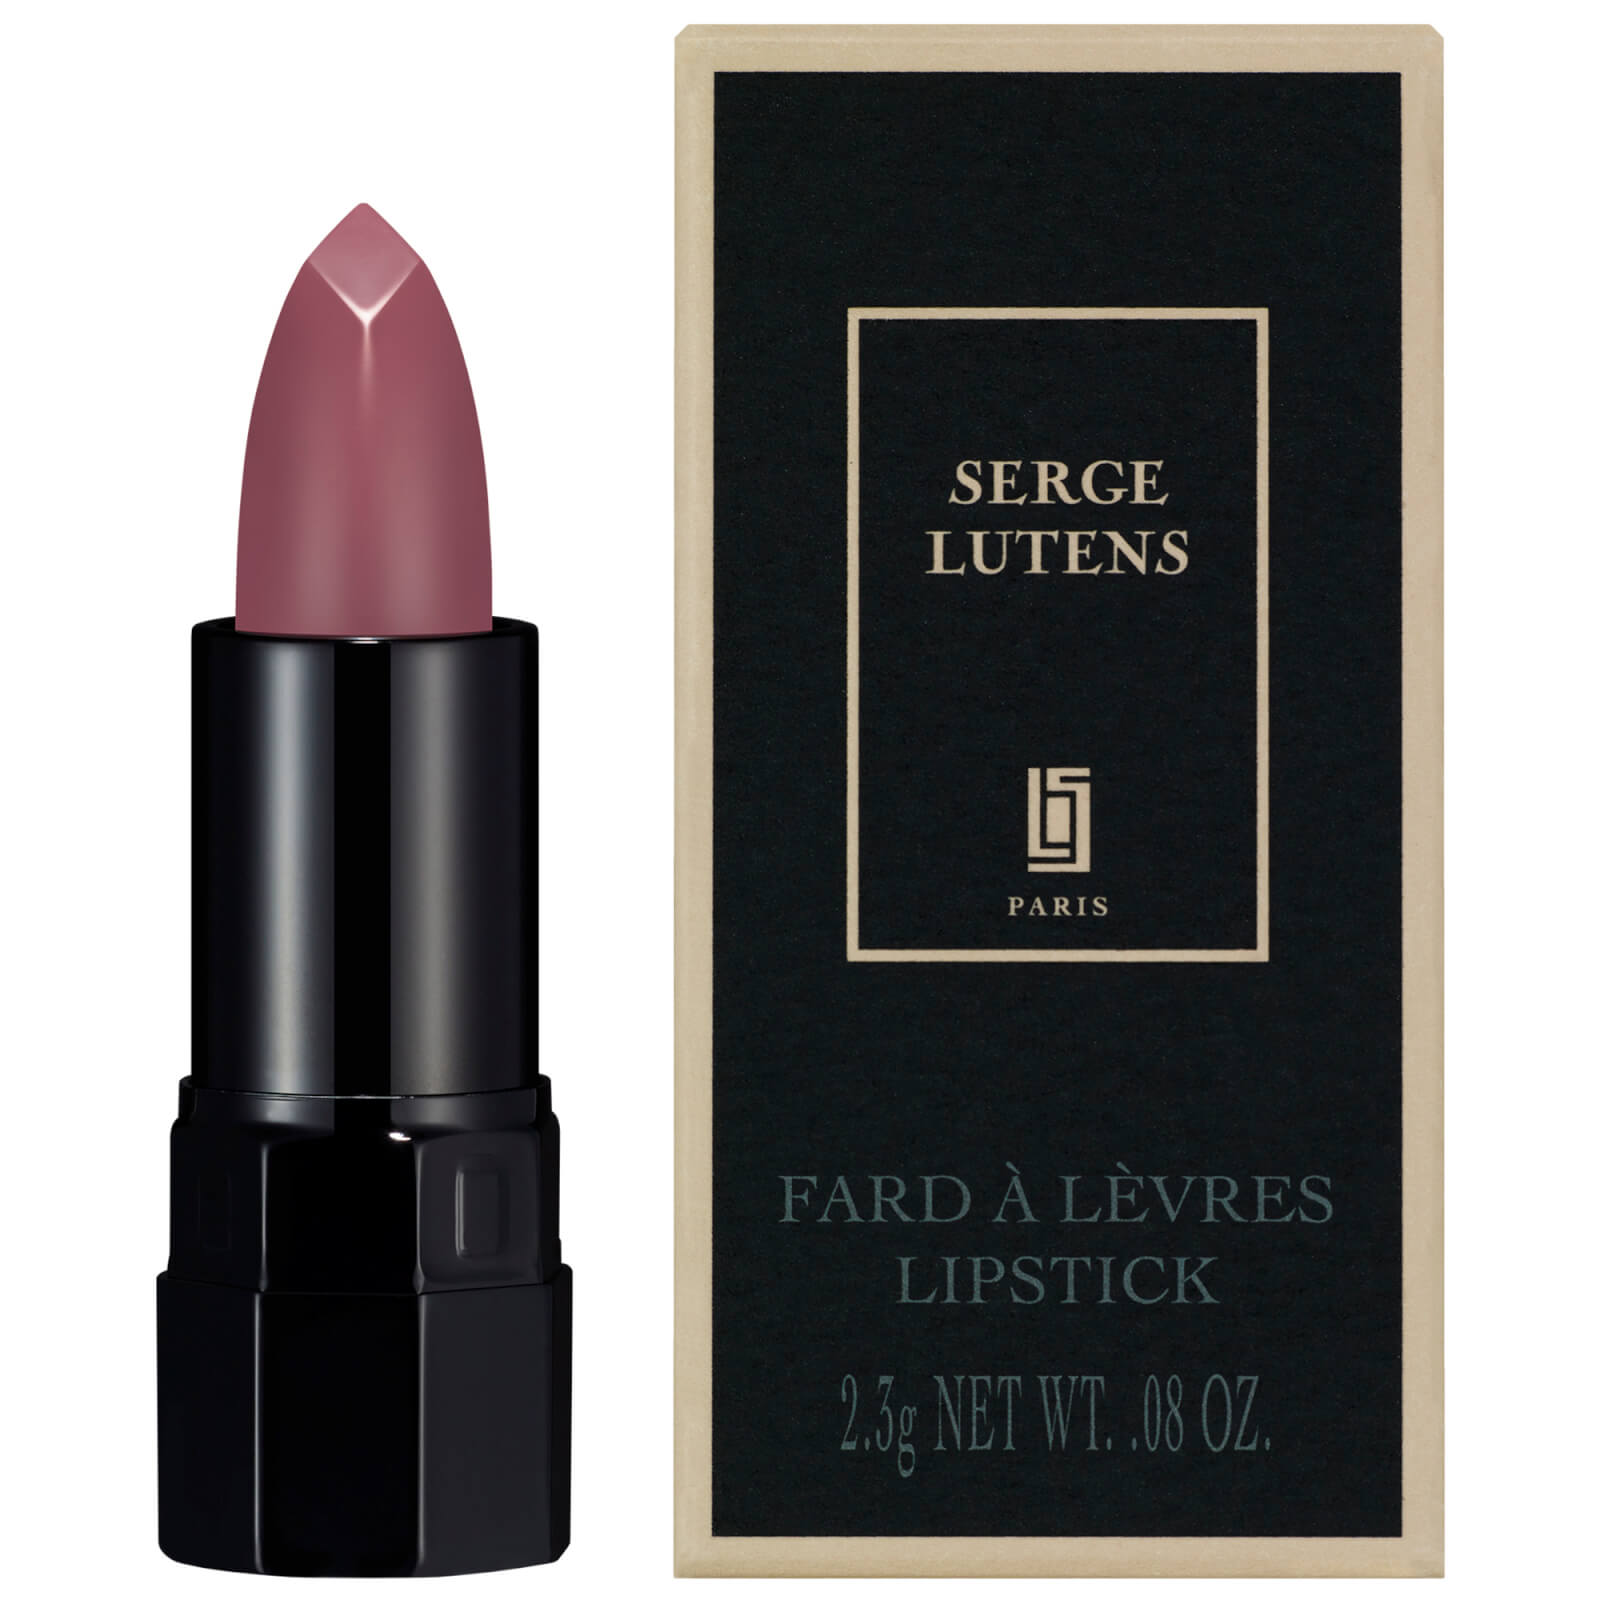 Serge Lutens Fard A Levres Lipstick 2.3g (Various Shades) - 21 Remords Boomerang